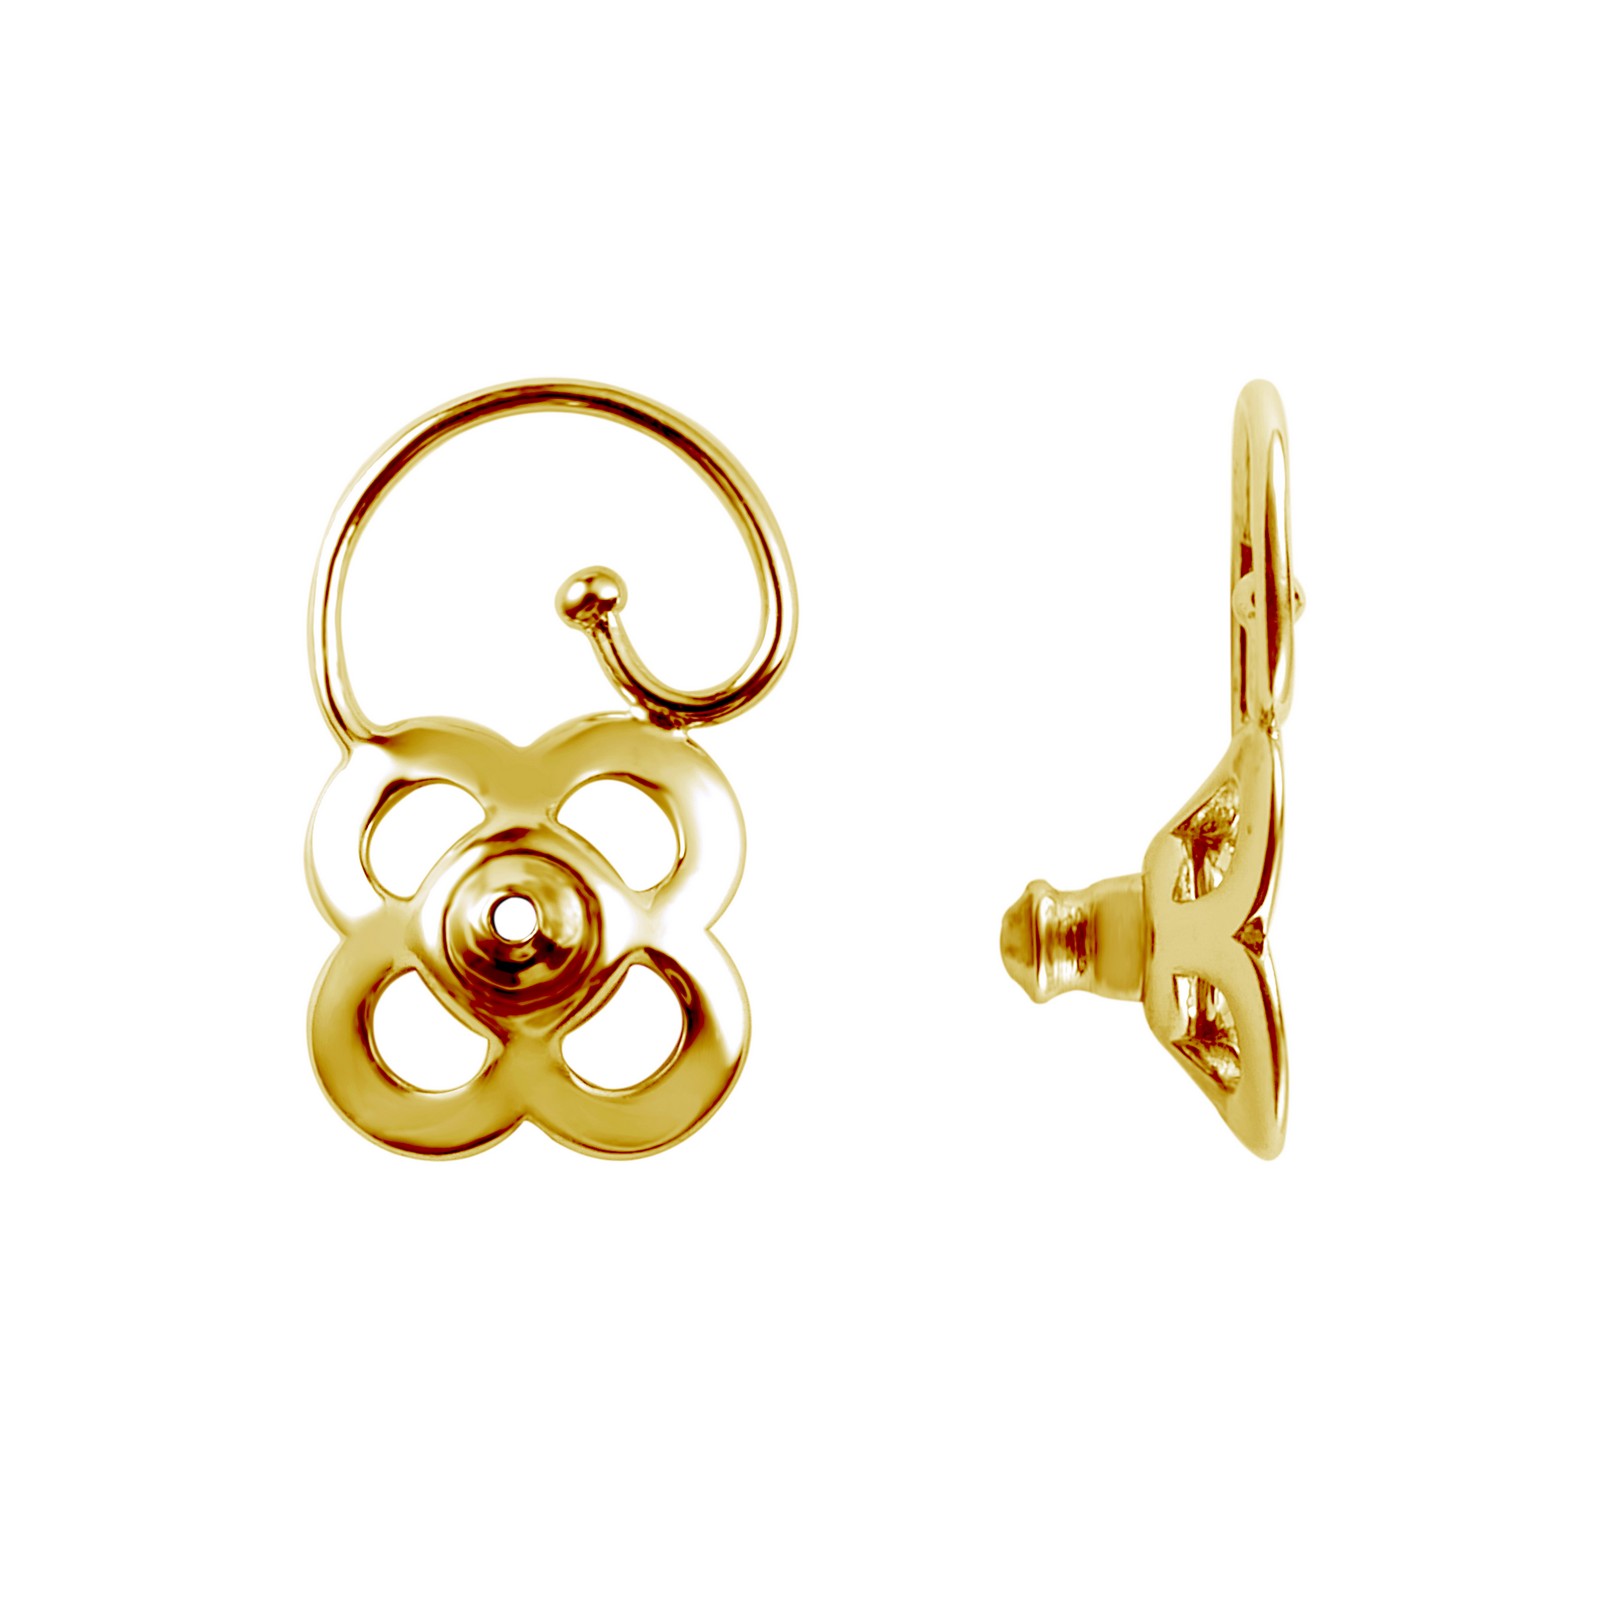 Lux-Clover Earring Backing Conti Jewelers Endwell, NY